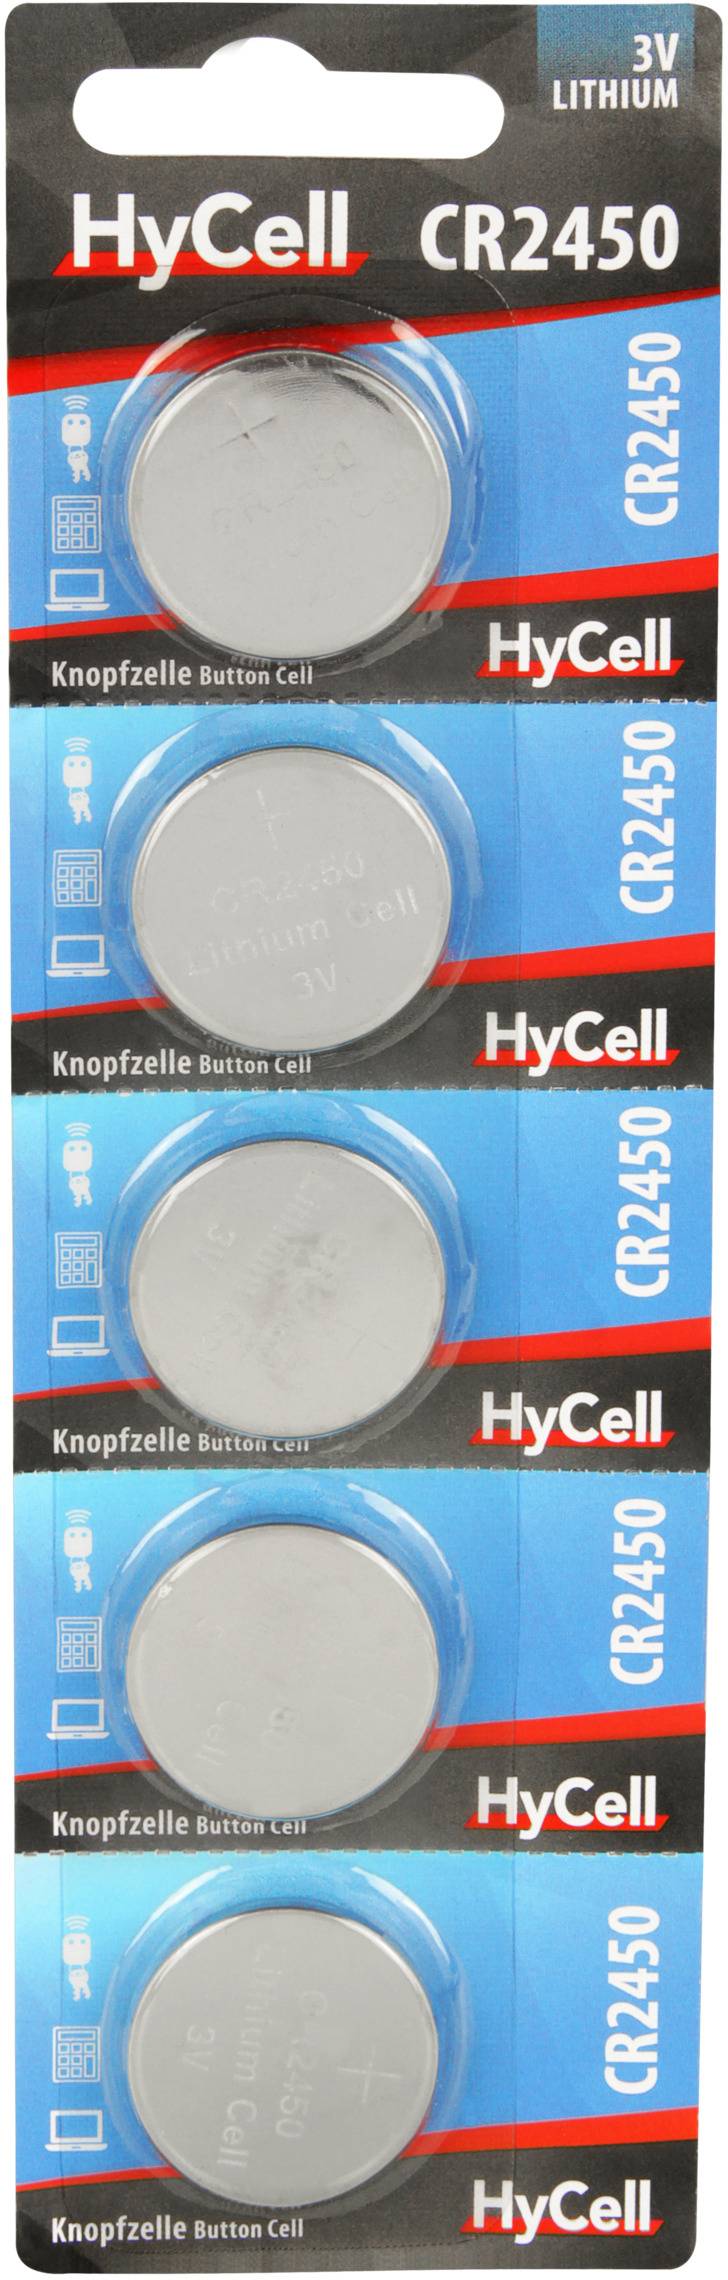 HYCELL CR2450 Knopfzelle CR 2450 Lithium 3 V 5 St.